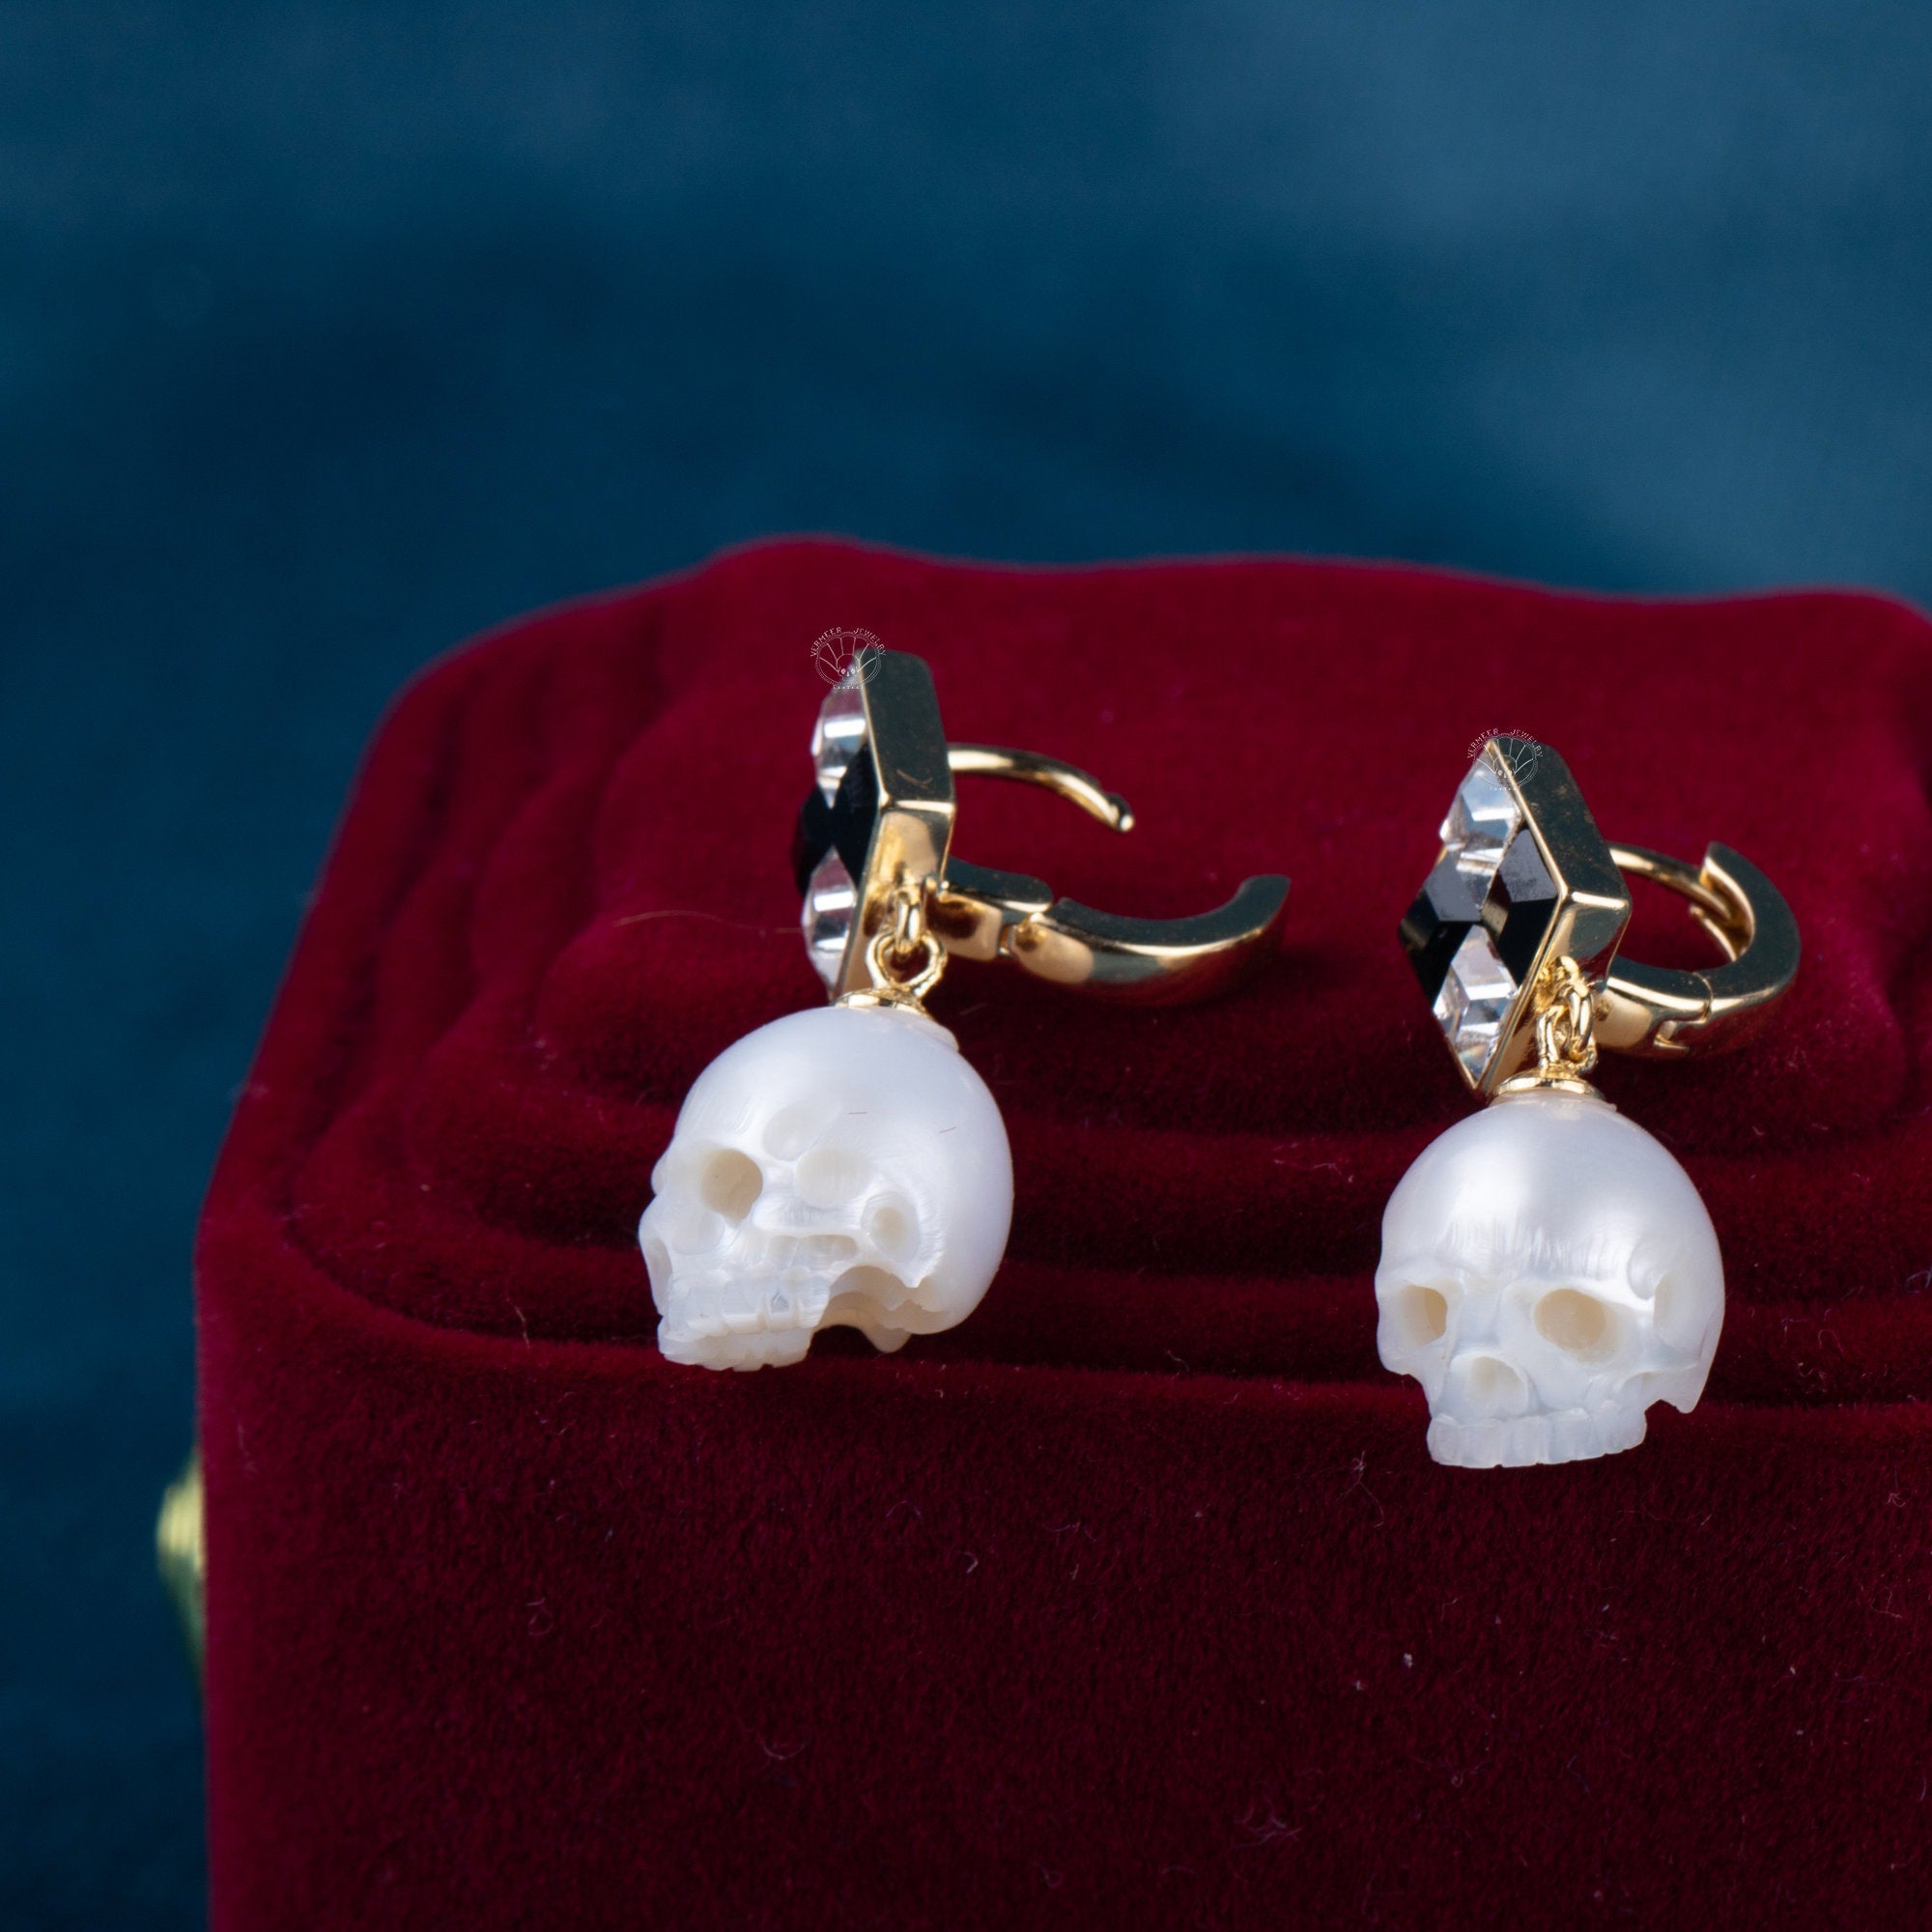 Themis's Earring skull carved pearl S925 silver earring